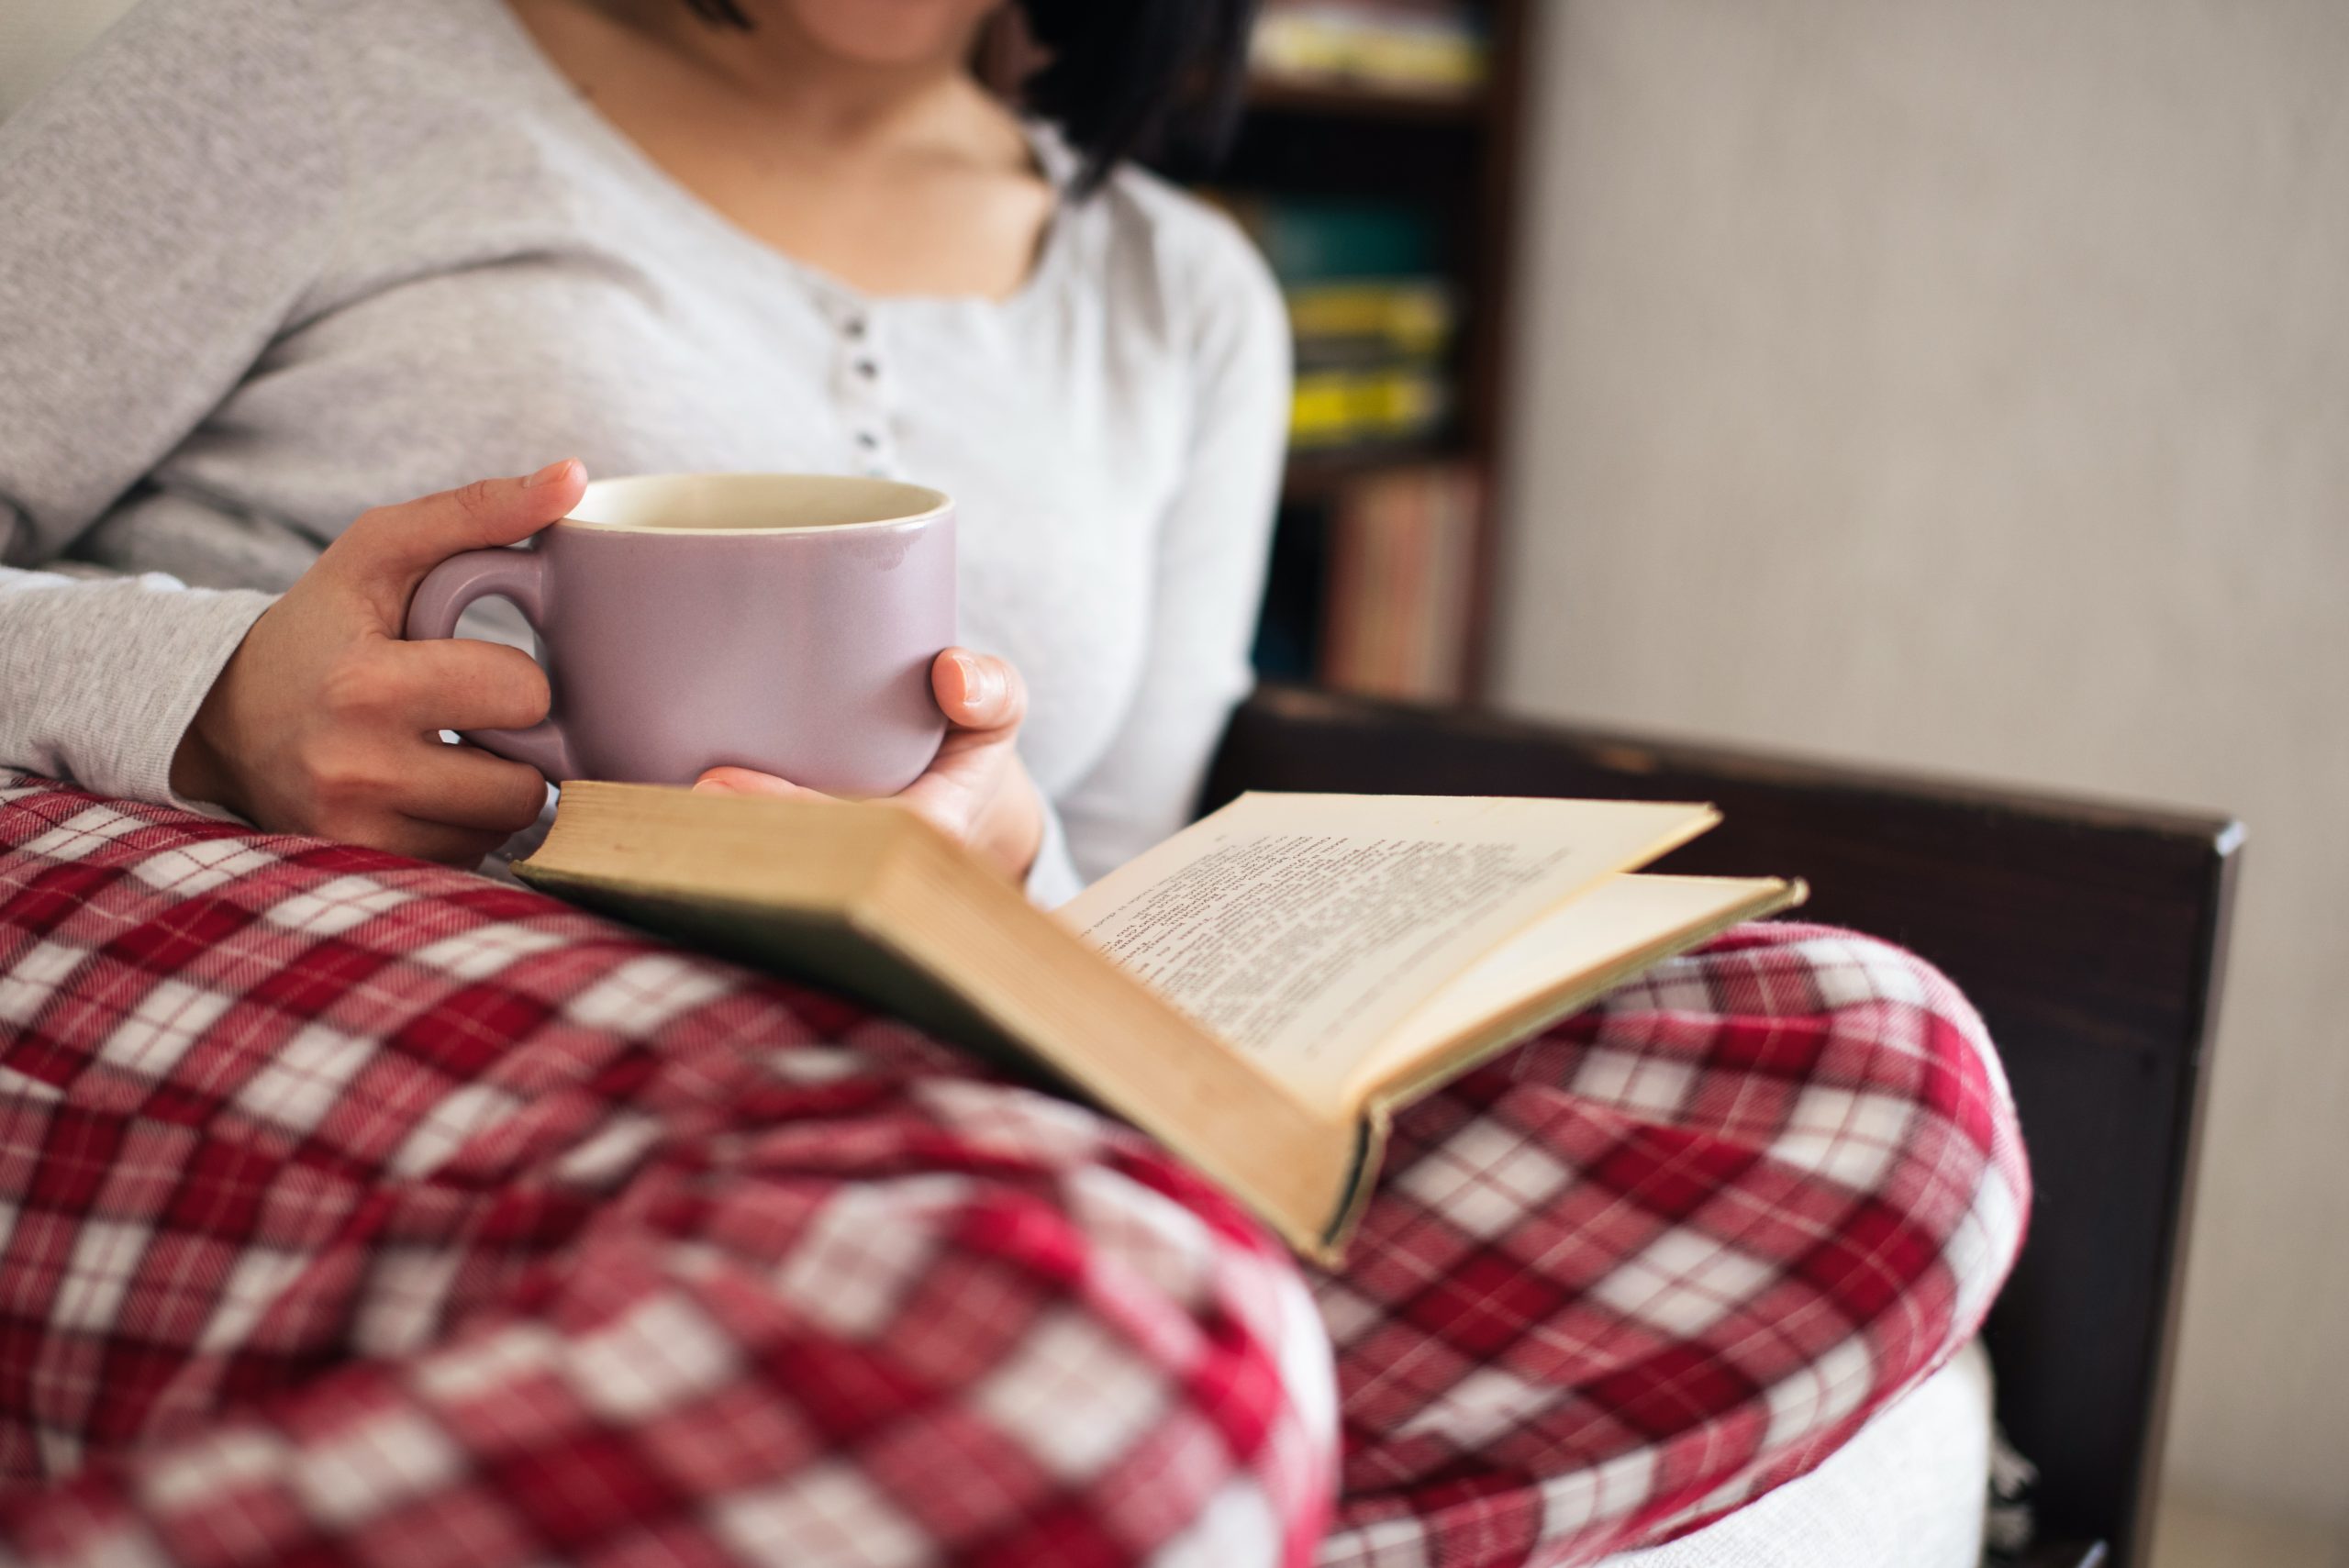 Close up of a woman's lap, she's wearing red buffalo check flannel pajama bottoms and a gray henley shirt, with an open book in her lap and a cup of coffee or tea, just a glimpse of her neck and short dark hair.